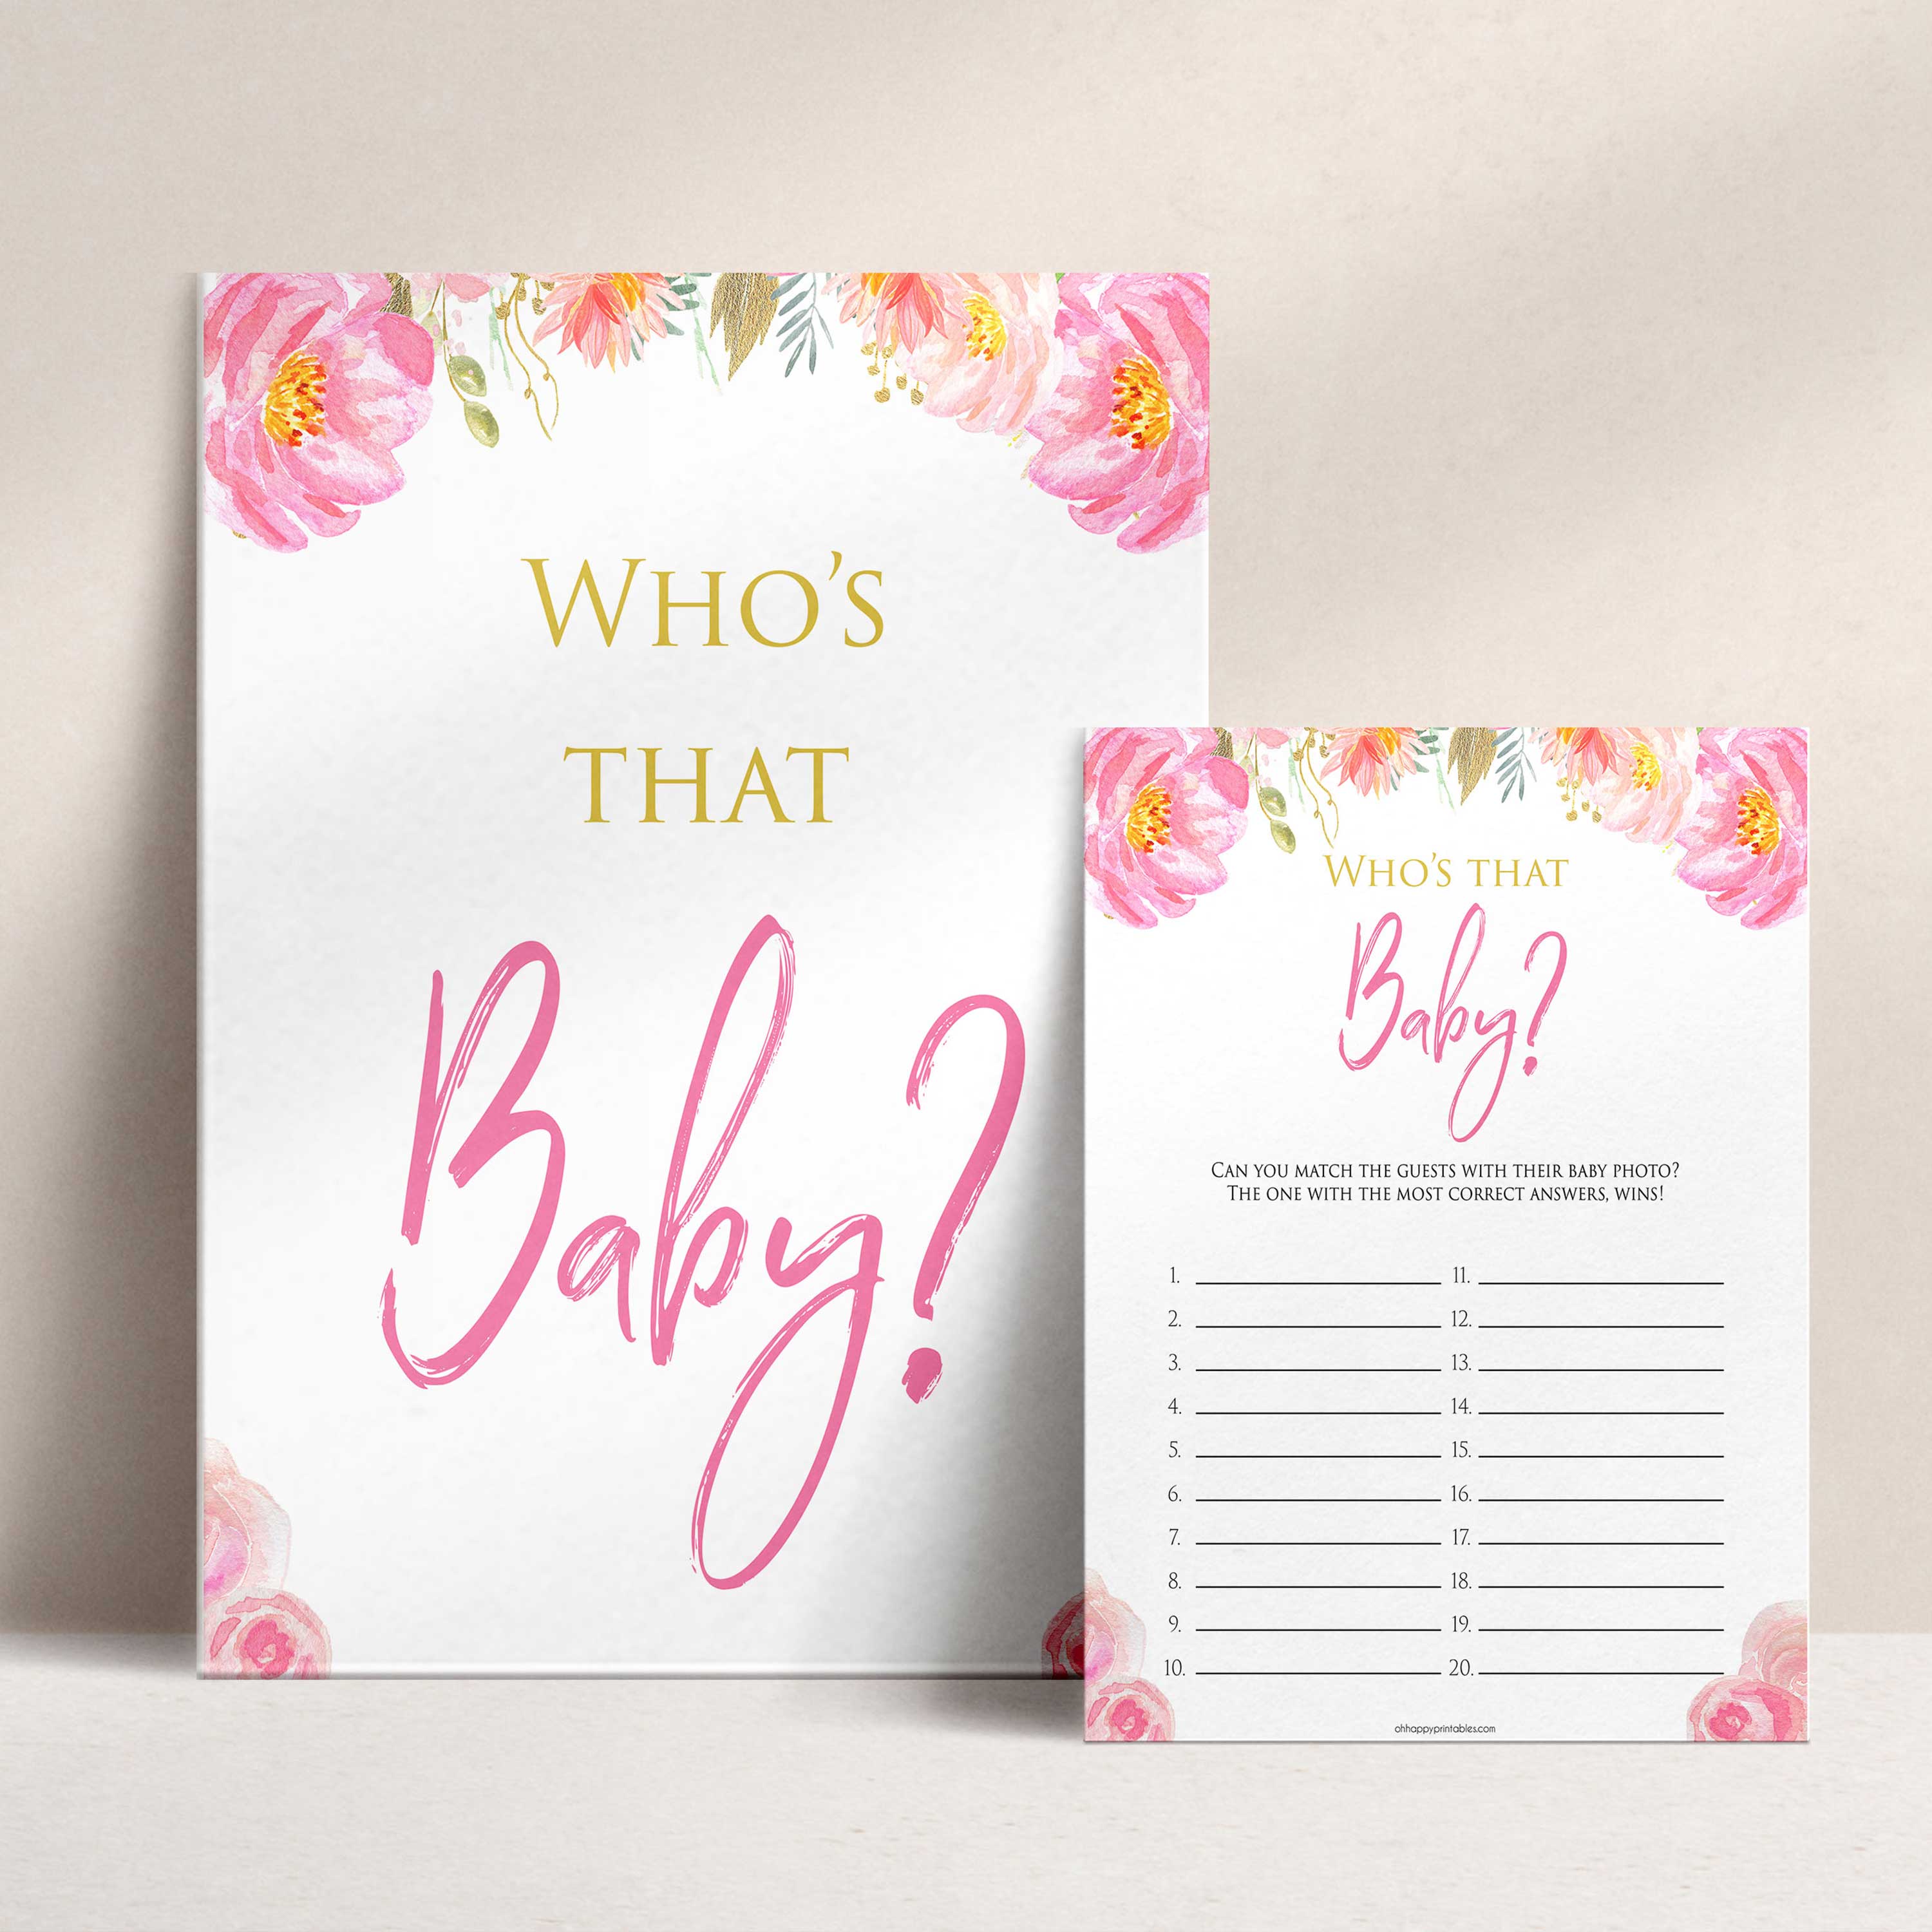 whos that baby game, guess the baby photo game, Printable baby shower games, blush floral fun baby games, baby shower games, fun baby shower ideas, top baby shower ideas, blush baby shower, blue baby shower ideas